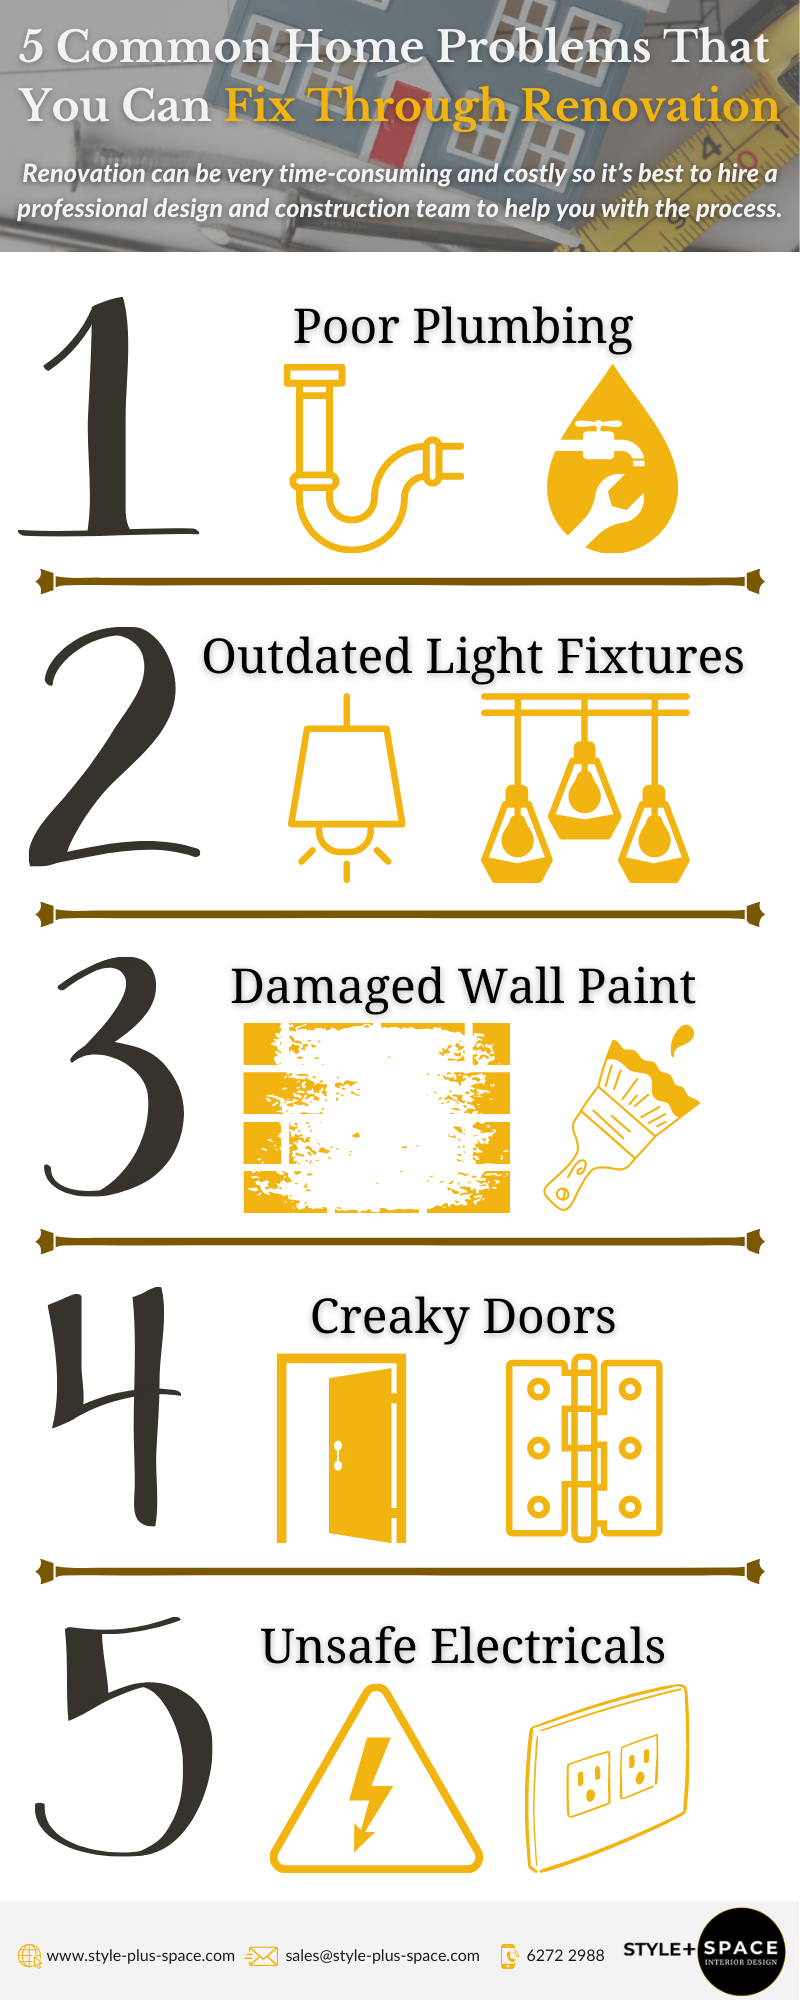 5 Common Home Problems That You Can Fix Through Renovation